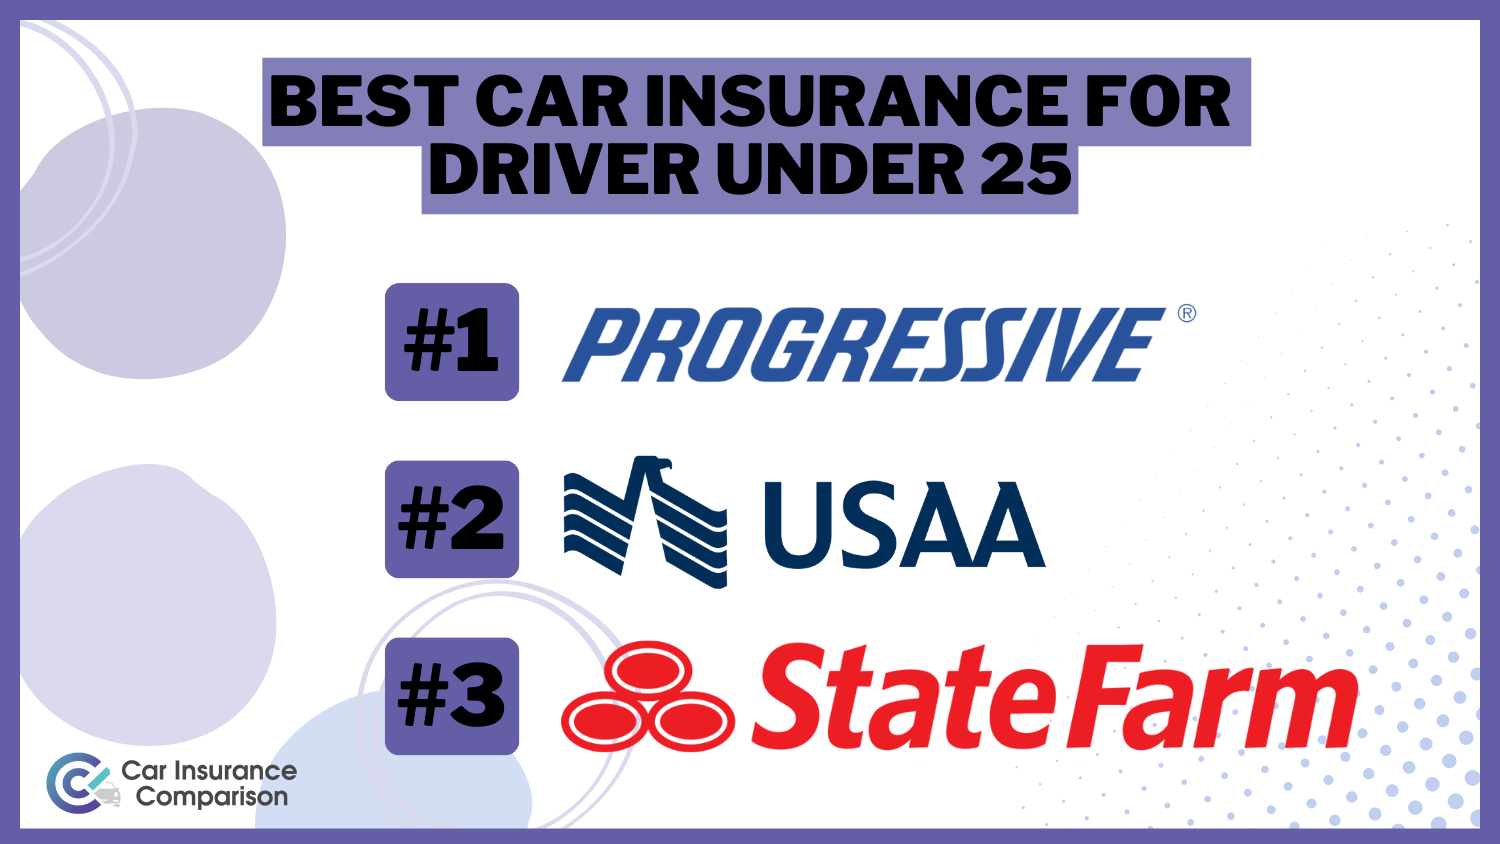 Best Car Insurance For Driver Under 25